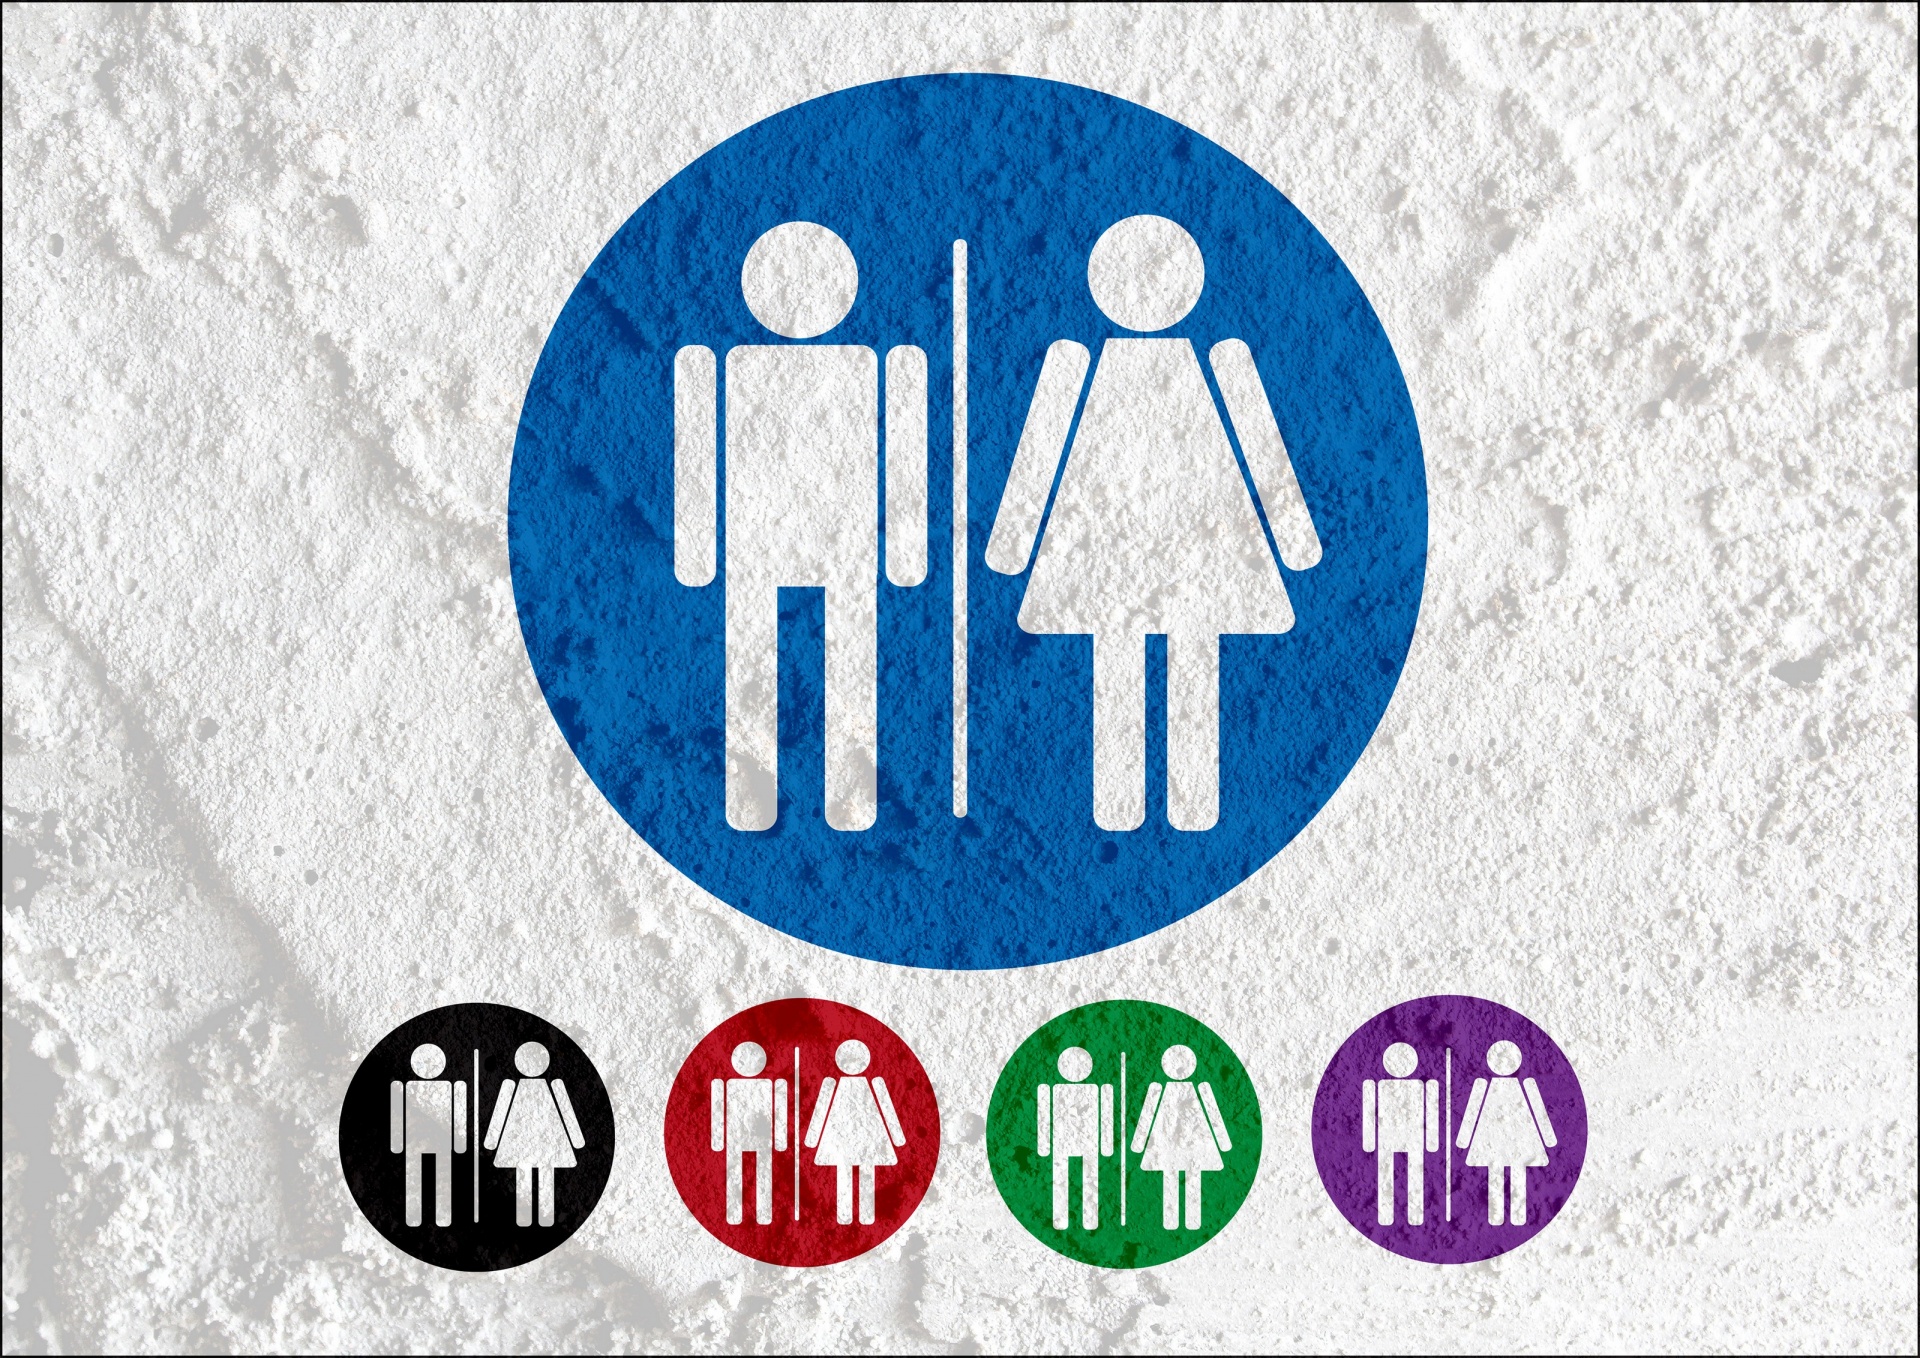 Restroom icon and Pictogram Man Woman Sign on Cement wall texture background design